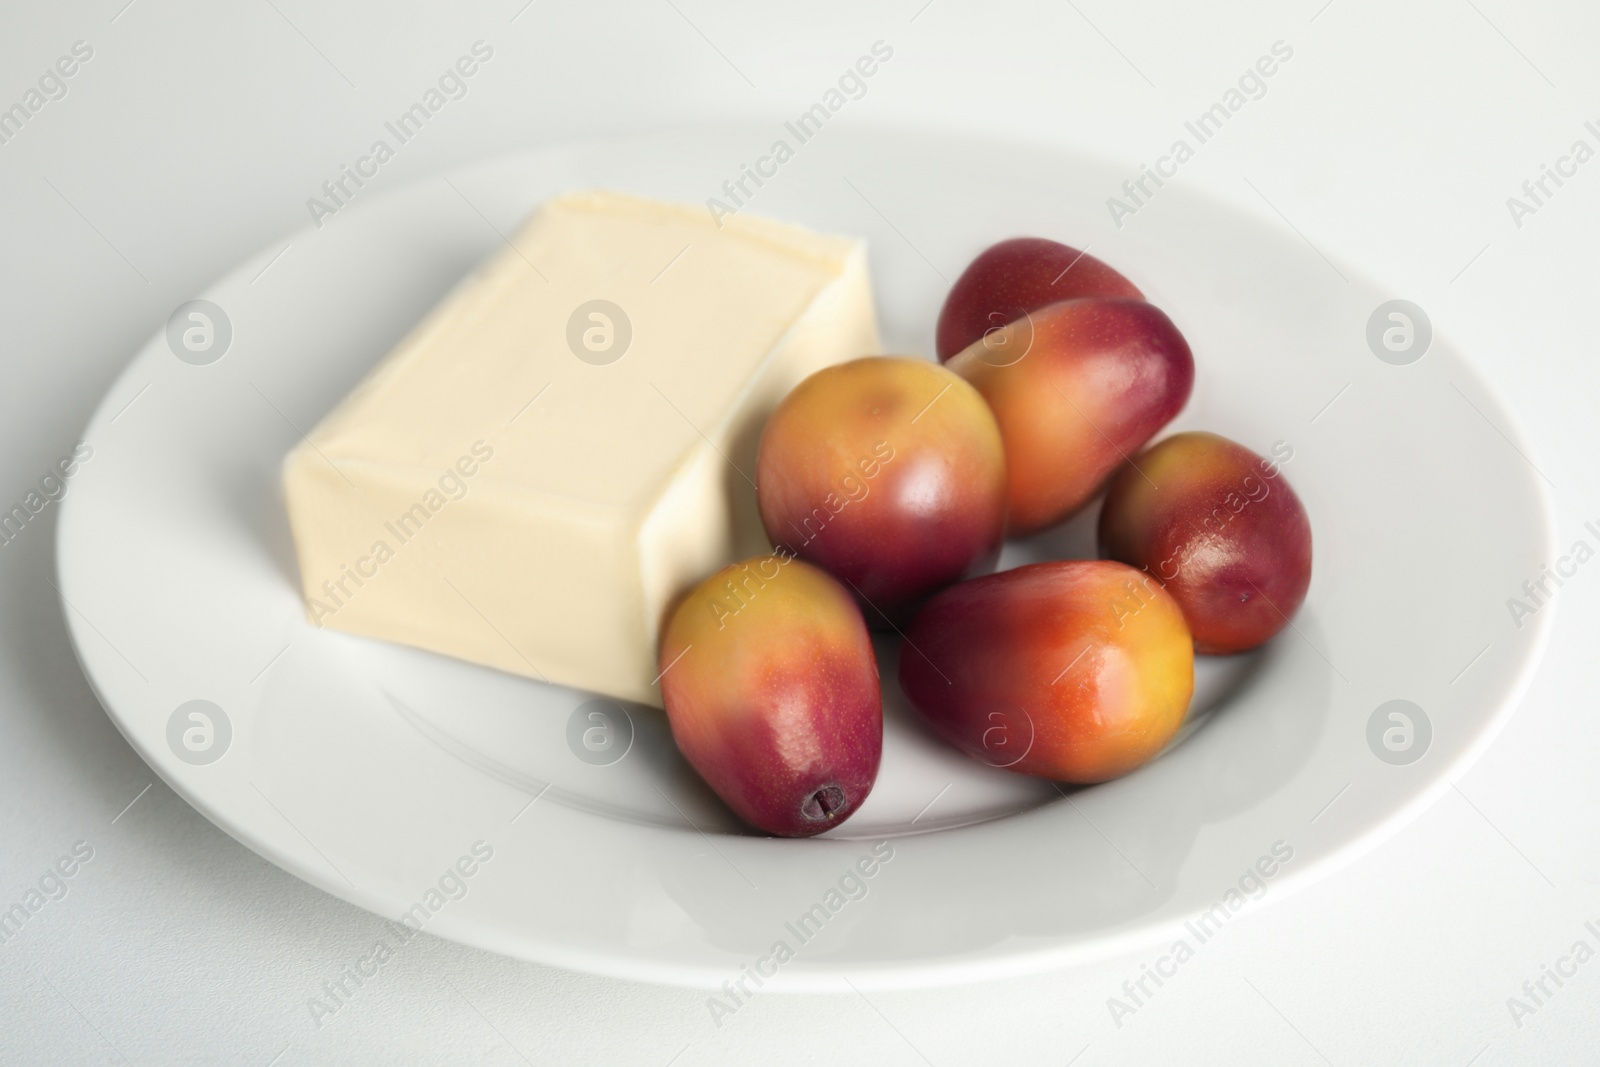 Image of Plate with butter and palm oil fruits isolated on white